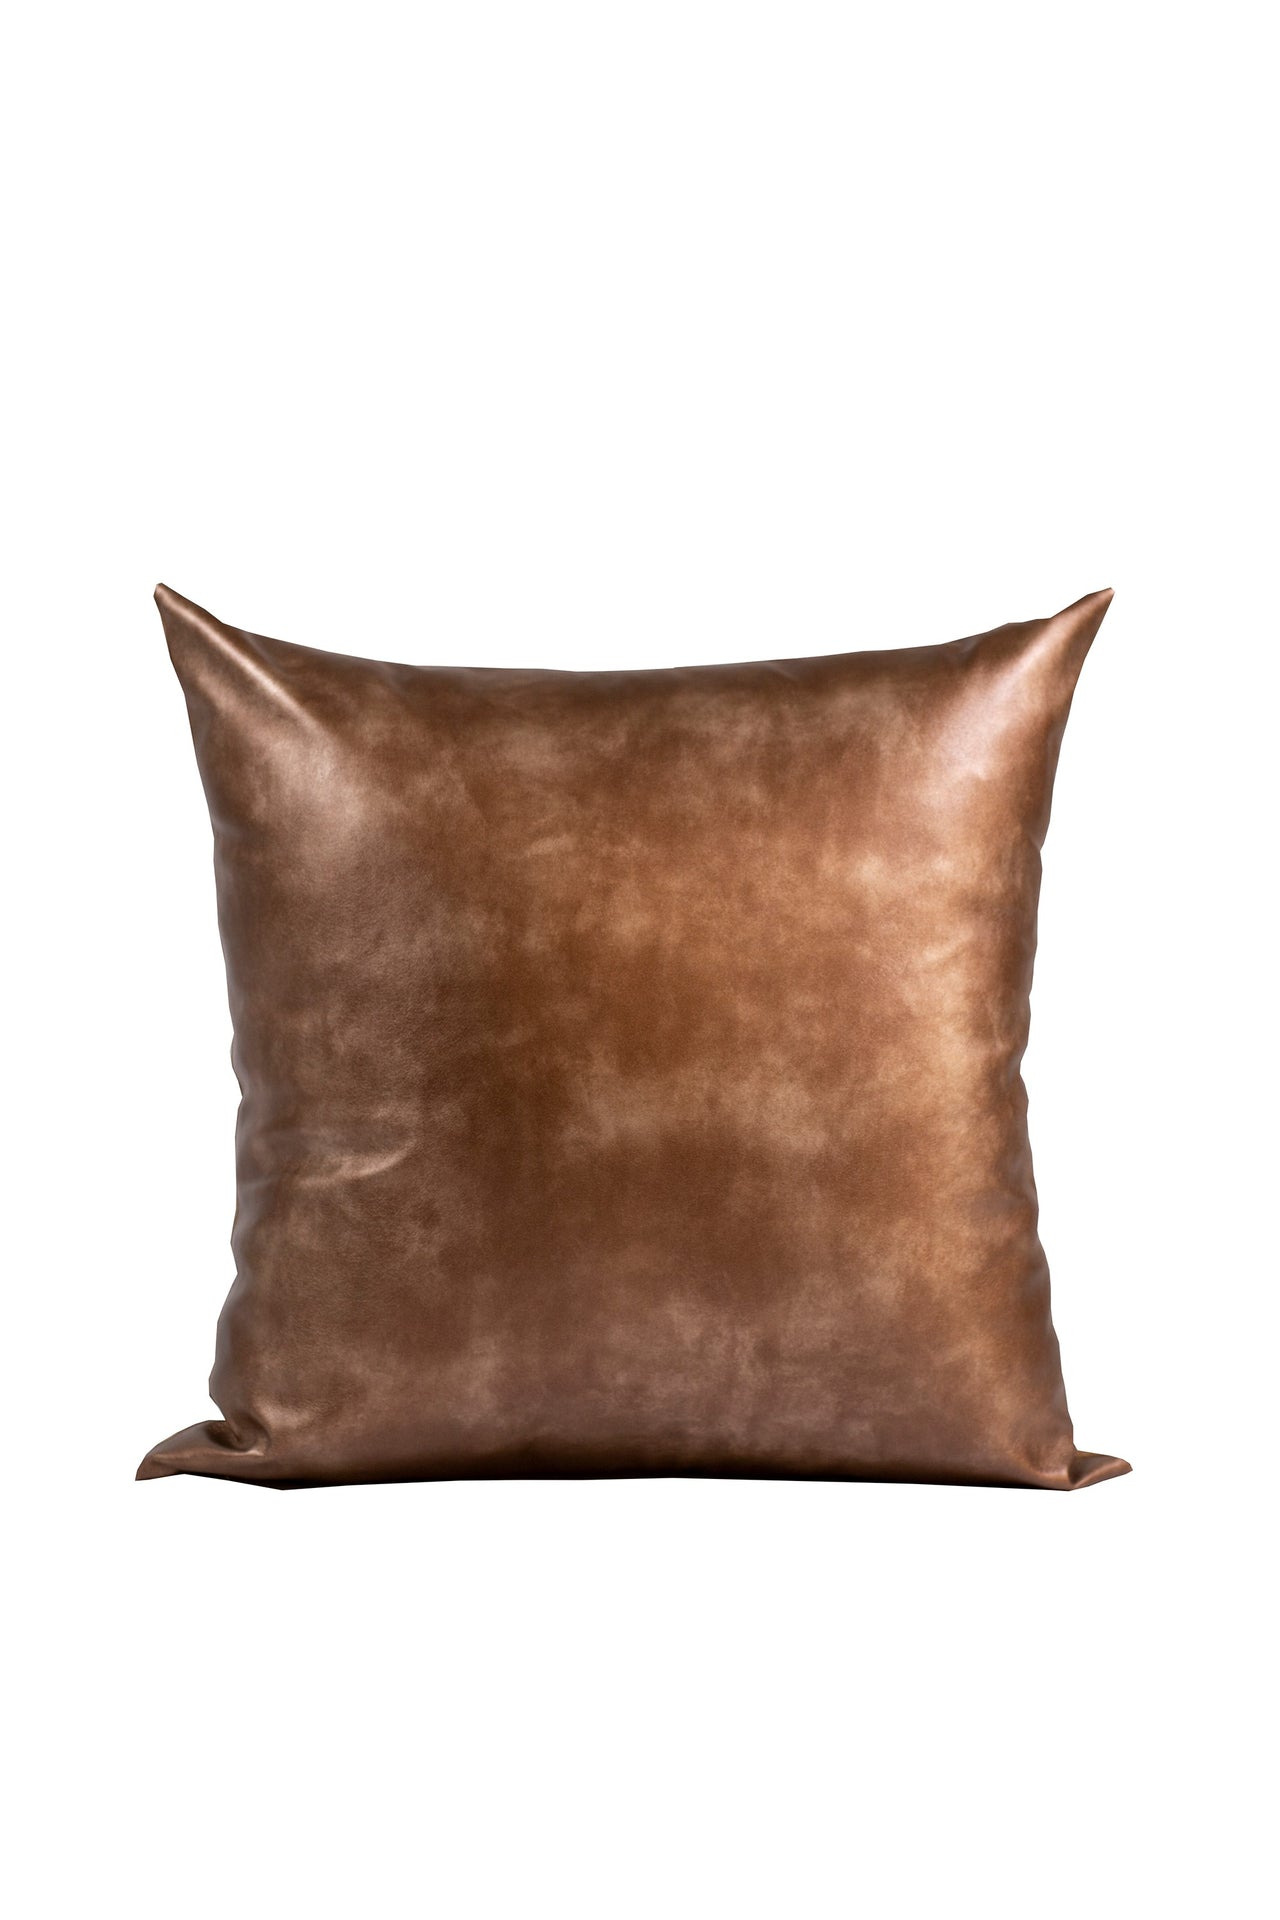 Made in Canada, Indigenous designed linen and vegan leather throw pillows.